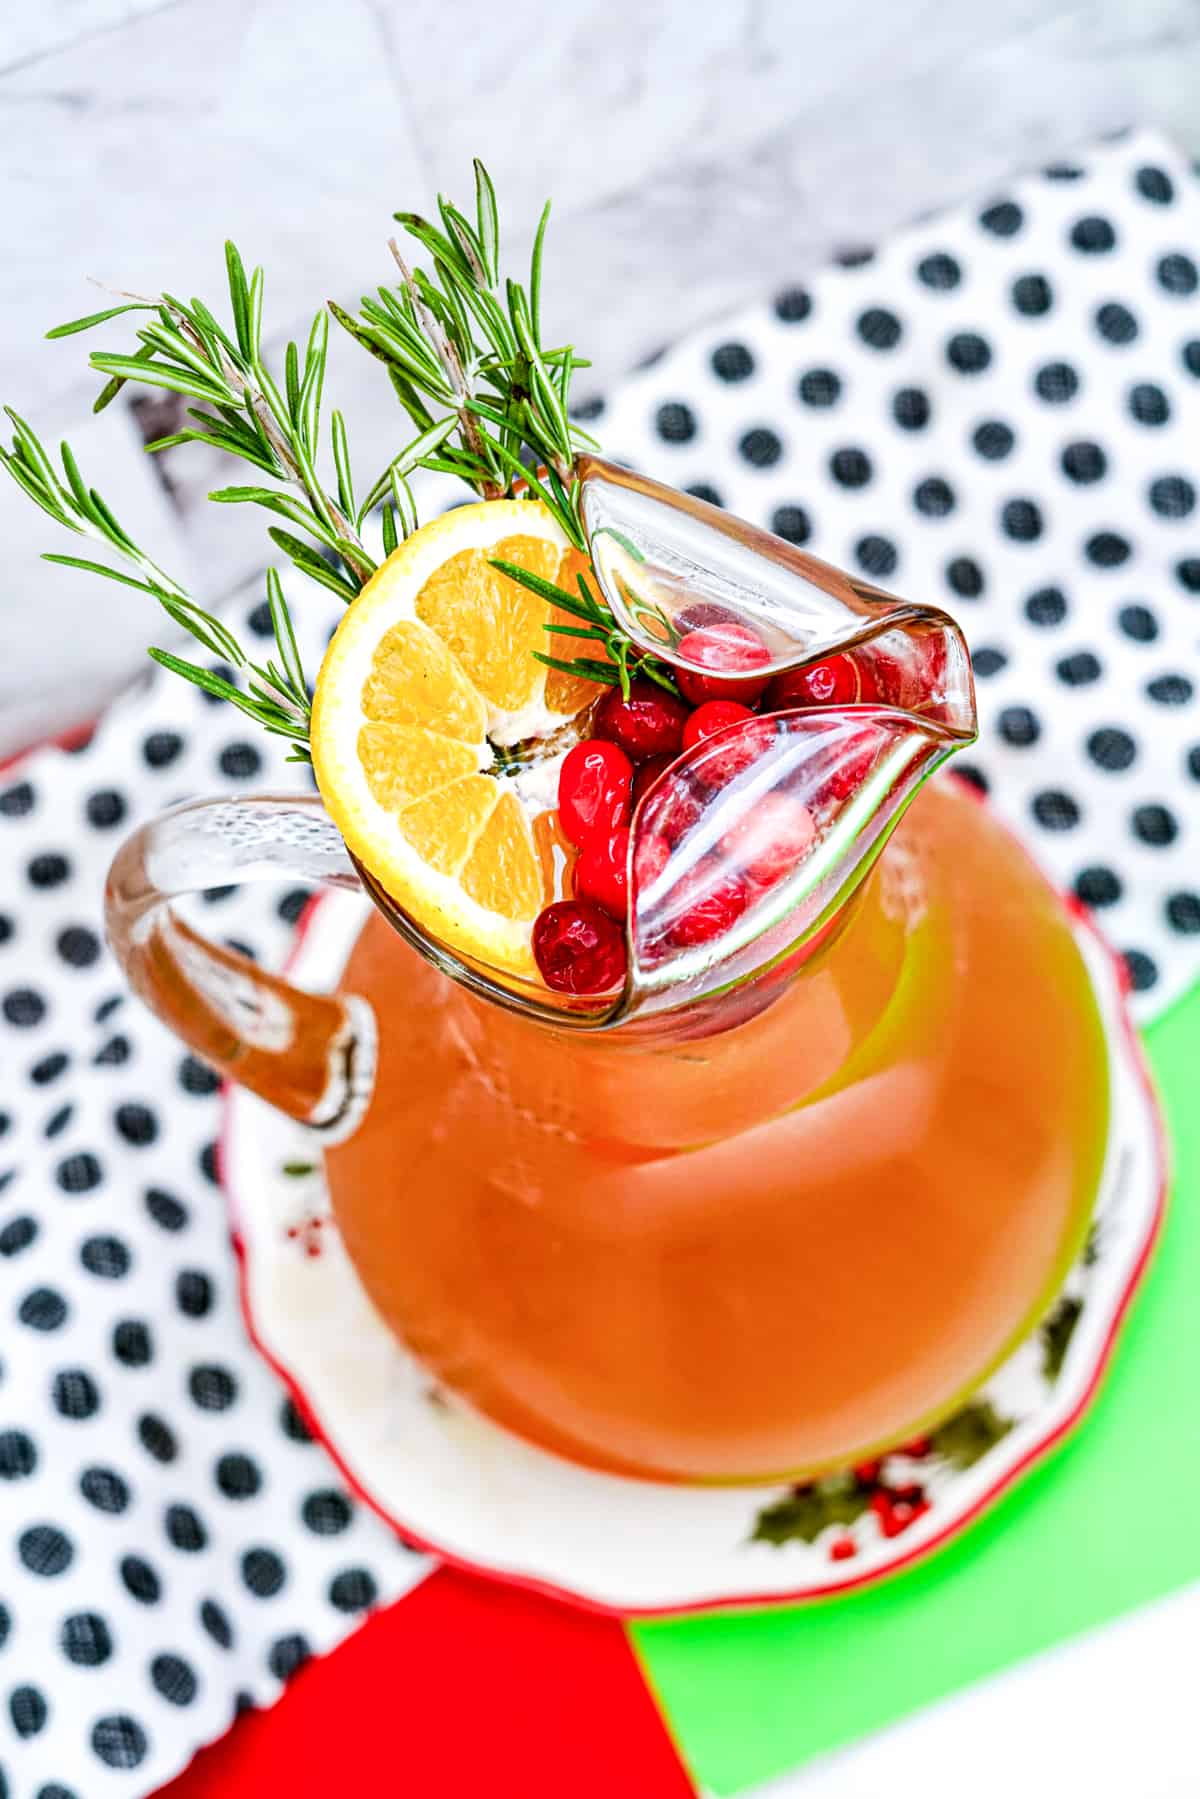 Overhead view of pitcher of punch garnished with rosemary, orange slice, and cranberries